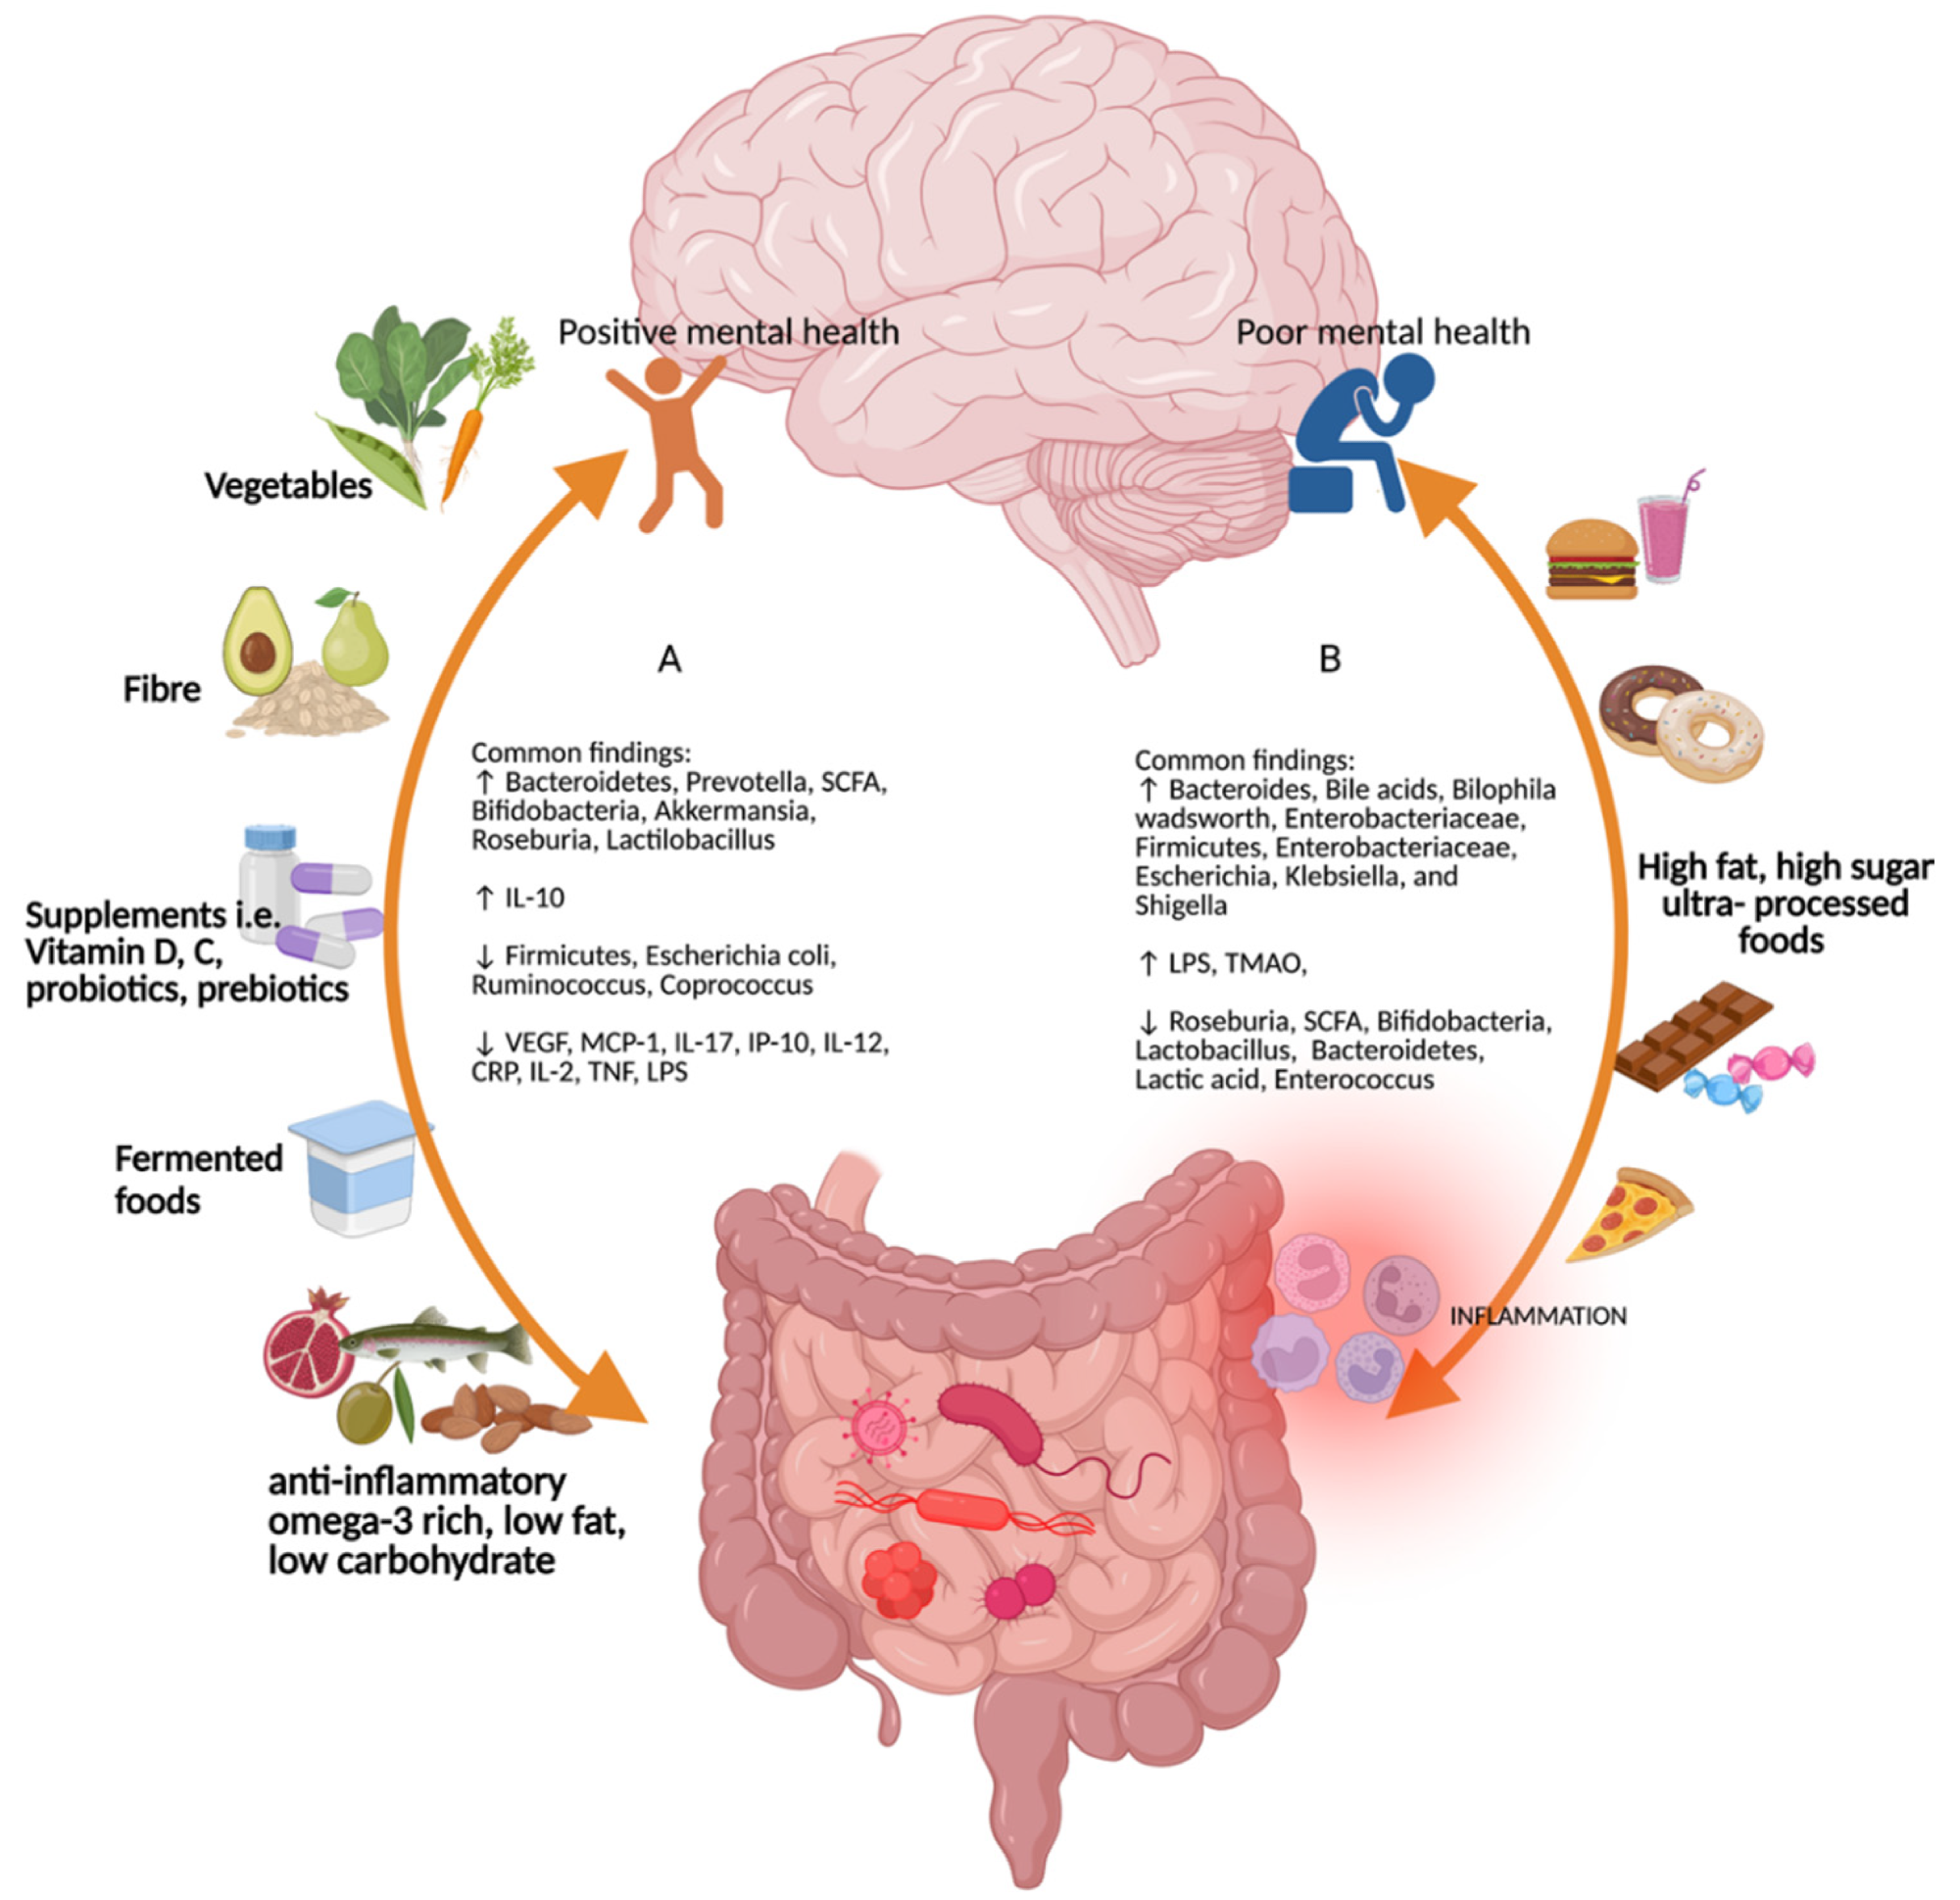 Overall results for different diet types on the gut-brain-microbiome axis.  (A) A diet rich in vegetables, fiber, micronutrients such as vitamins D and C, probiotics and prebiotics, fermented foods, anti-inflammatory foods rich in omega-3s, low fat and low carbohydrates promotes positive mental health and an increase in Bacteroidetes, Prevotella, short chain fatty acids, Bifodobacteria, Akkermansia, Roseburia, Lactilobacillus and interleukin (IL)-10, decrease in Firmicutes, Escherichia coli, Ruminococcus, Coprococcus, vascular endothelial growth factor, monocyte chemoattractant protein-1, interferon gamma-induced protein 10, IL-17 , IL-12, c-reactive protein, IL-2, tumor necrosis factor and lipopolysaccharide.  (B) Foods high in fat, sugar, and ultra-processed foods increase Bacteroides, bile acids, Bilophila wadsworth, Enterobacteriaceae, Firmicutes, Enterobacteriaceae, Escherichia, Klebsiella, and Shigella.  Drawing created with Biorender (as of April 29, 2022).